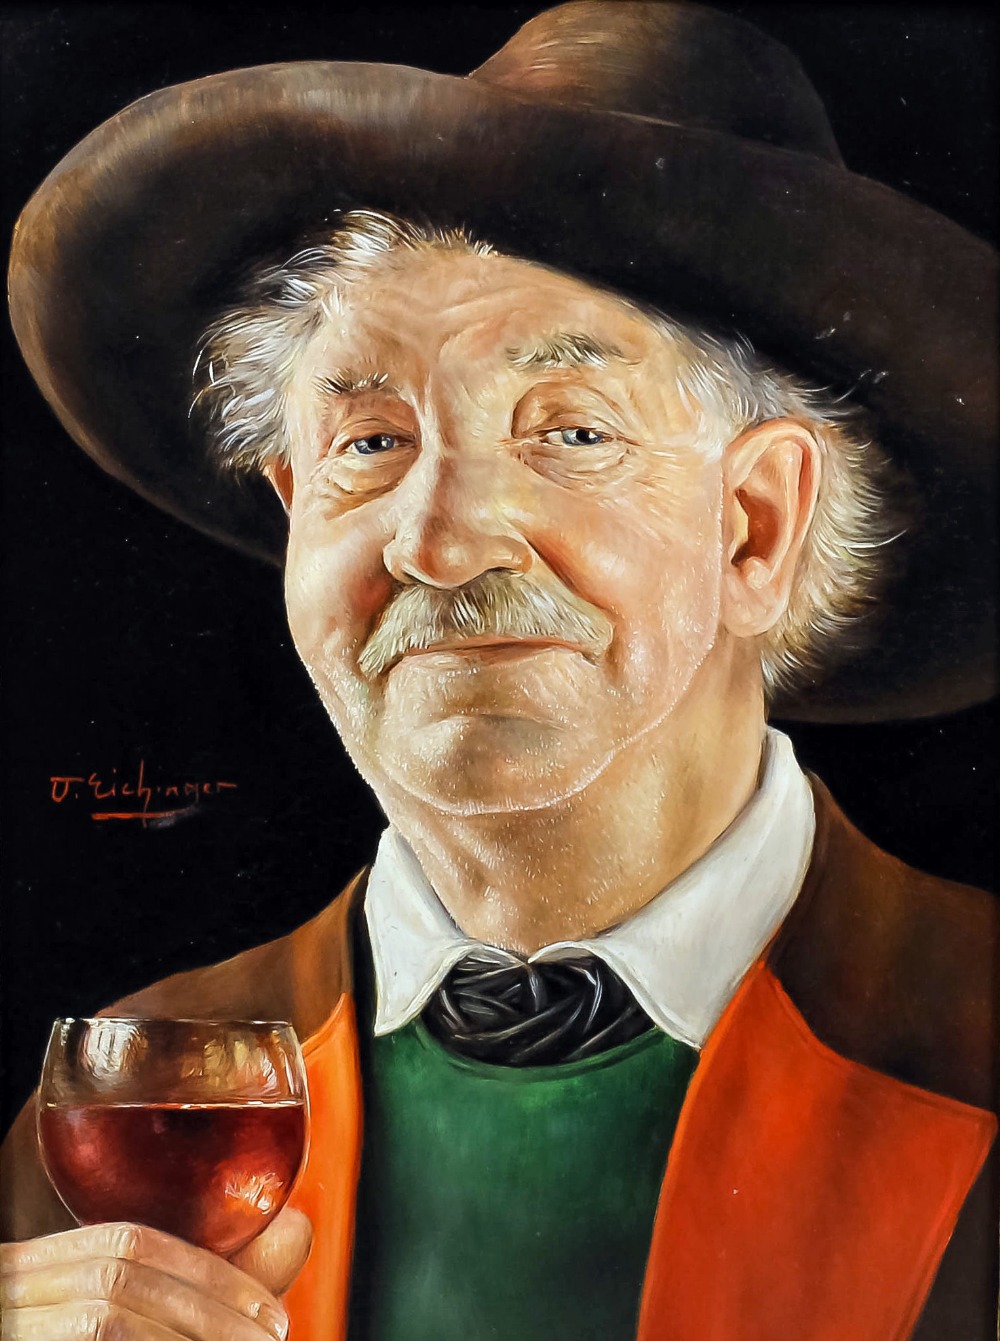 ***Otto Eichinger (1922-2004) - Oil portrait - "A Glass of Wine" - Head and shoulders of a